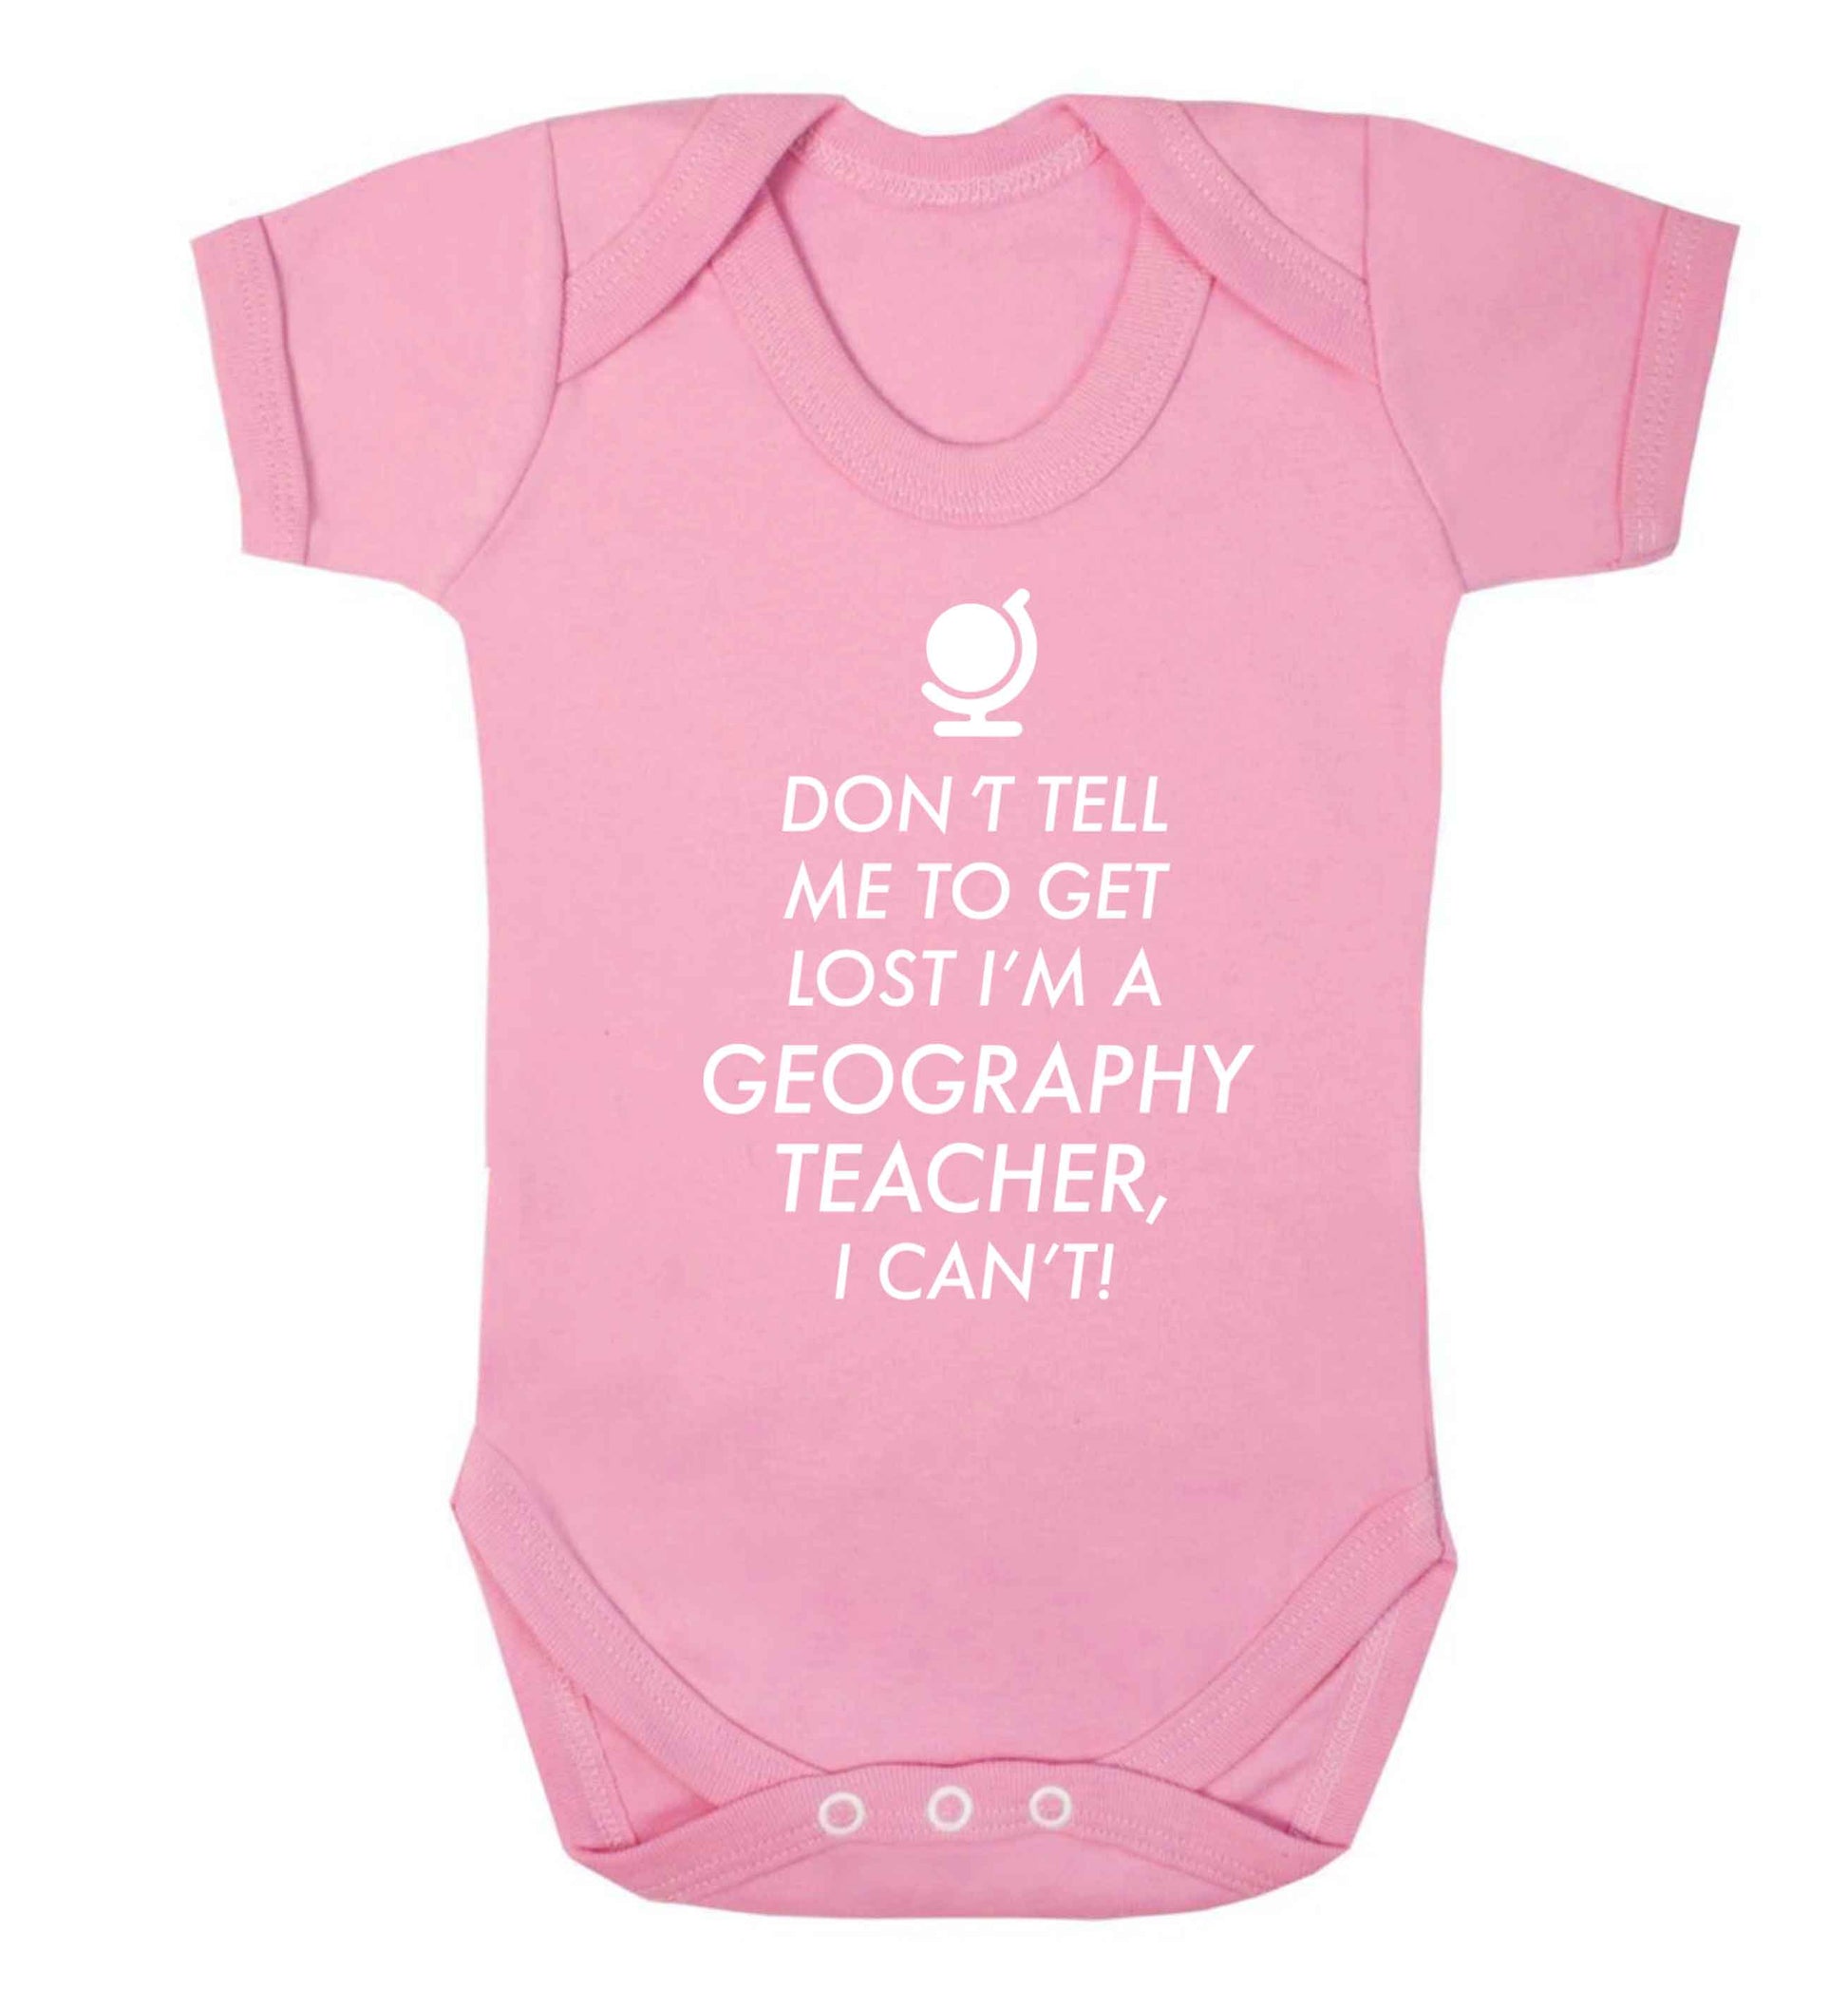 Don't tell me to get lost I'm a geography teacher, I can't Baby Vest pale pink 18-24 months